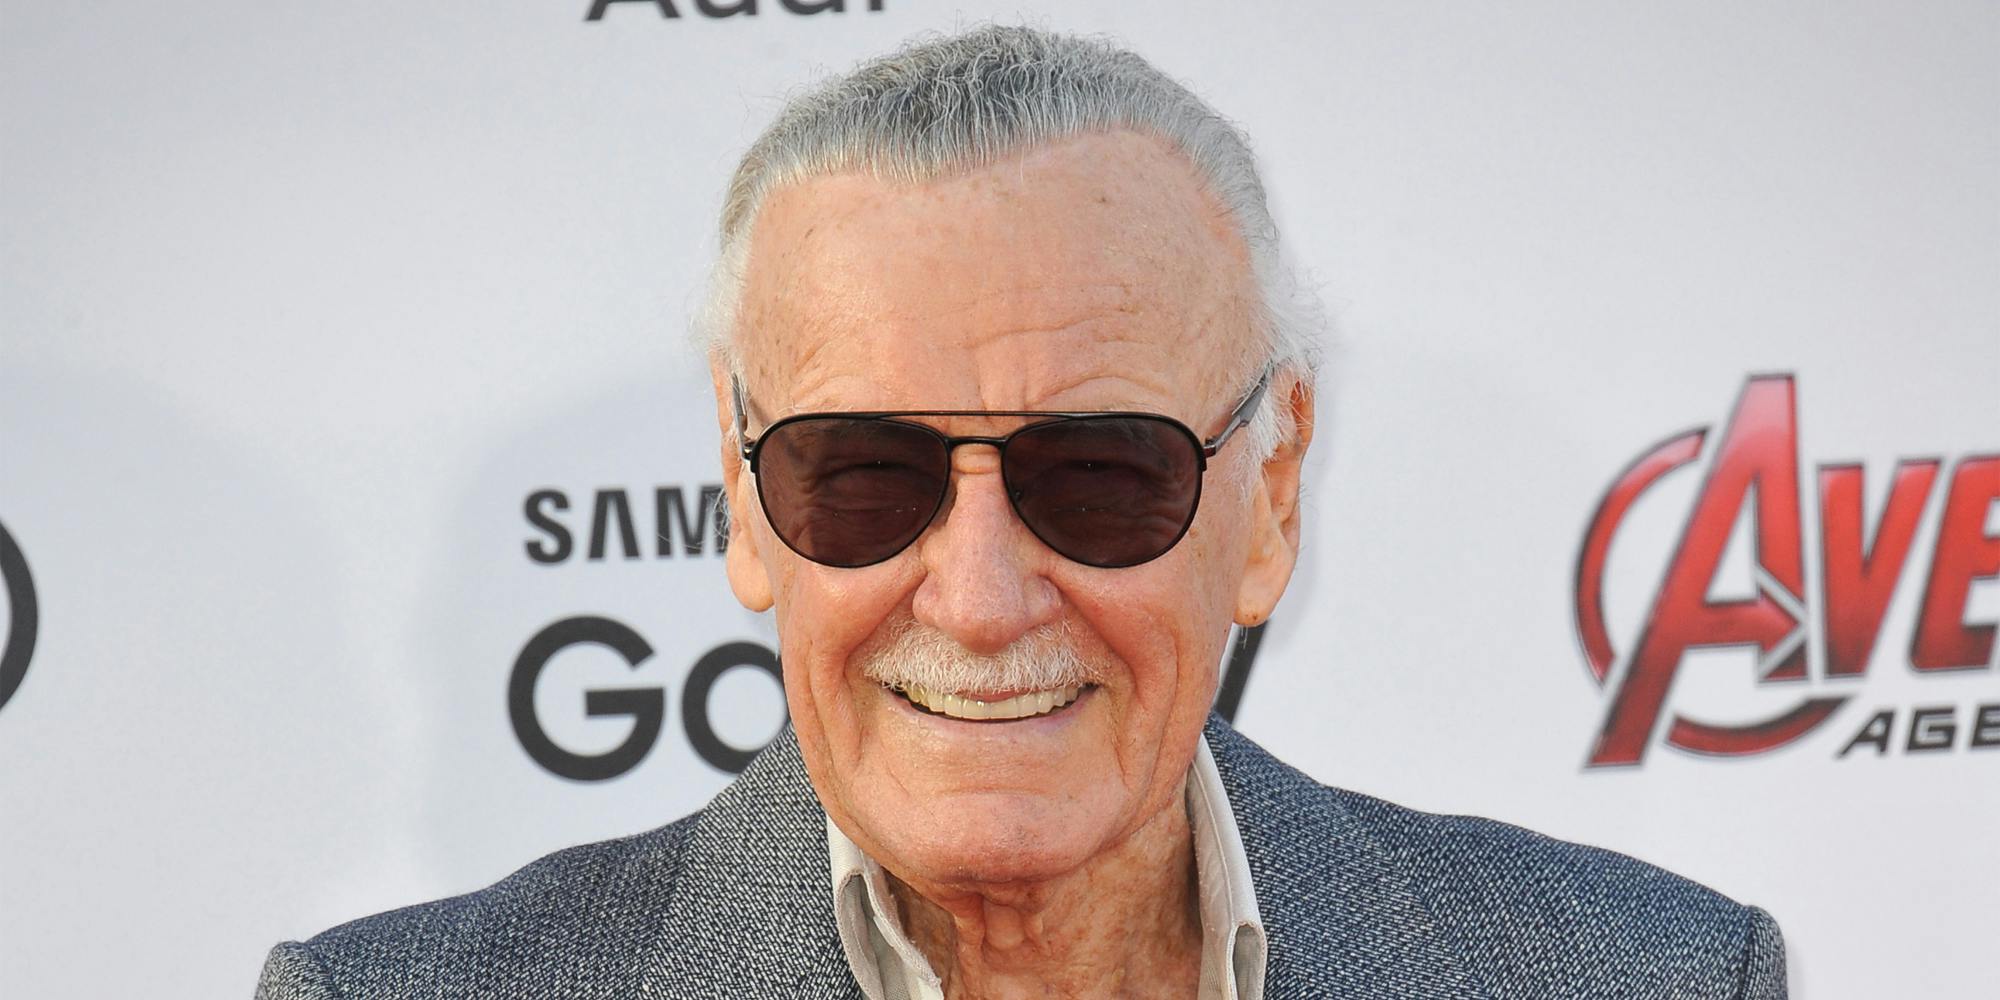 Stan Lee smiling in front of white Avengers background